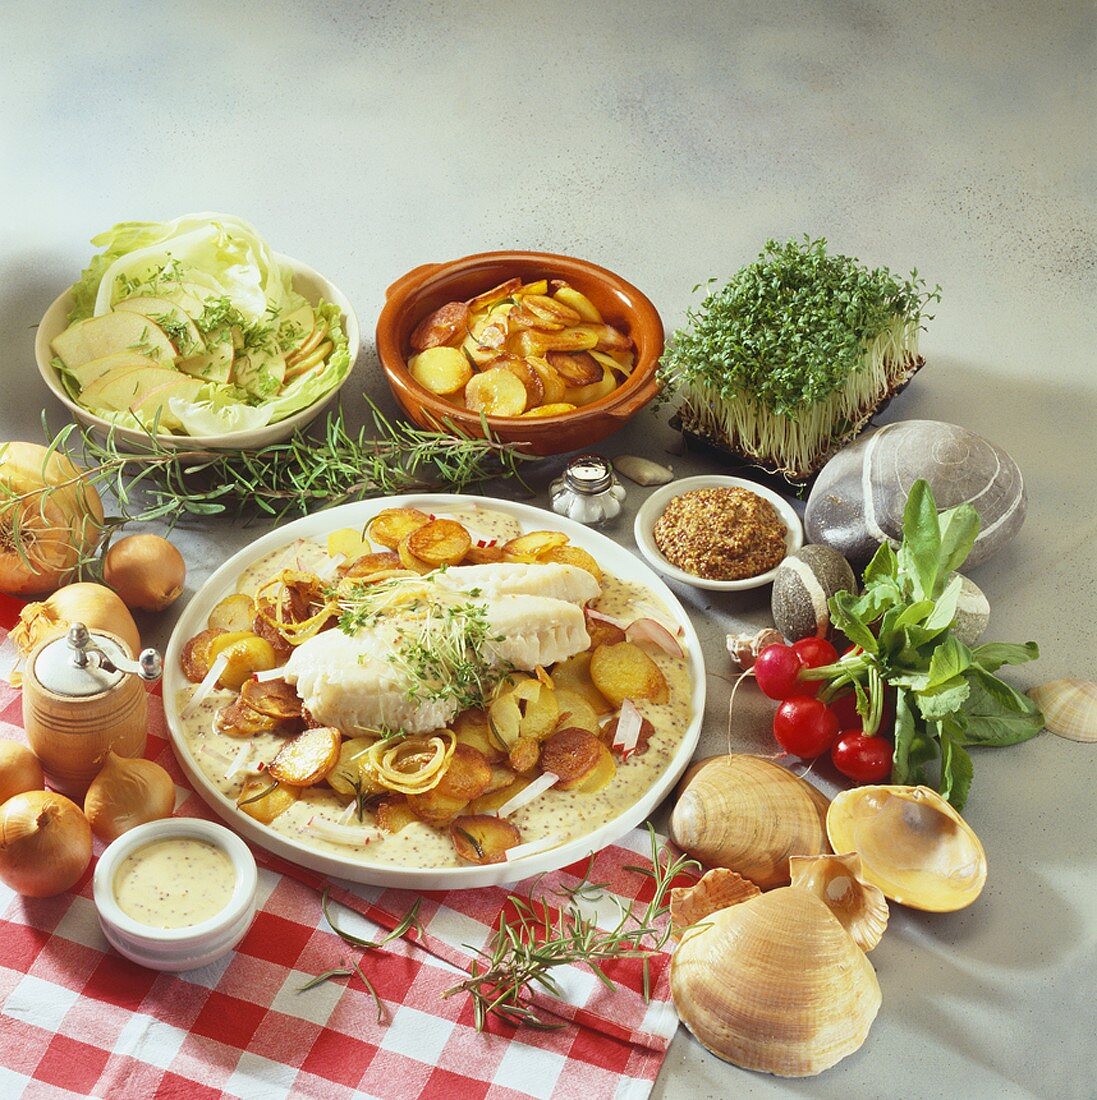 Pannfisch (Fish with mustard sauce & fried potatoes, N. Germany)